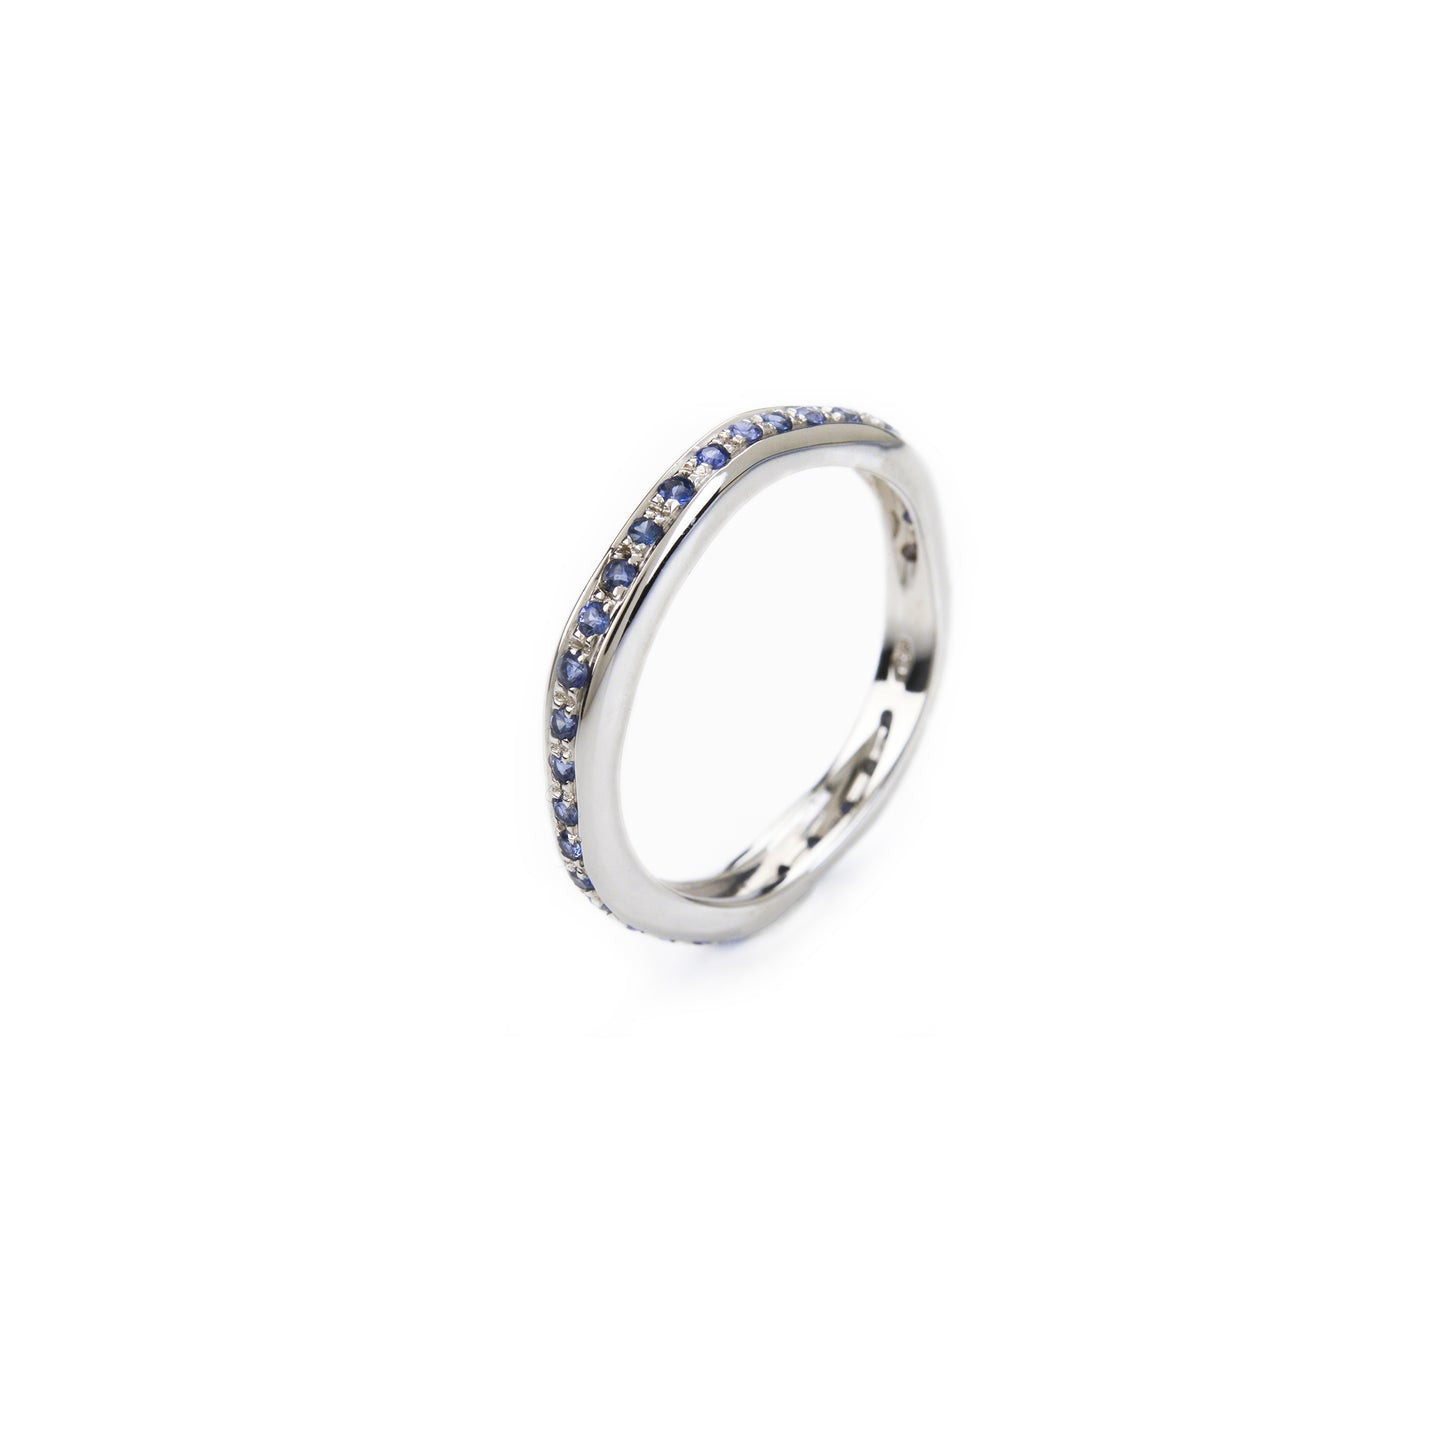 Wavy eternity ring in gold and sapphires